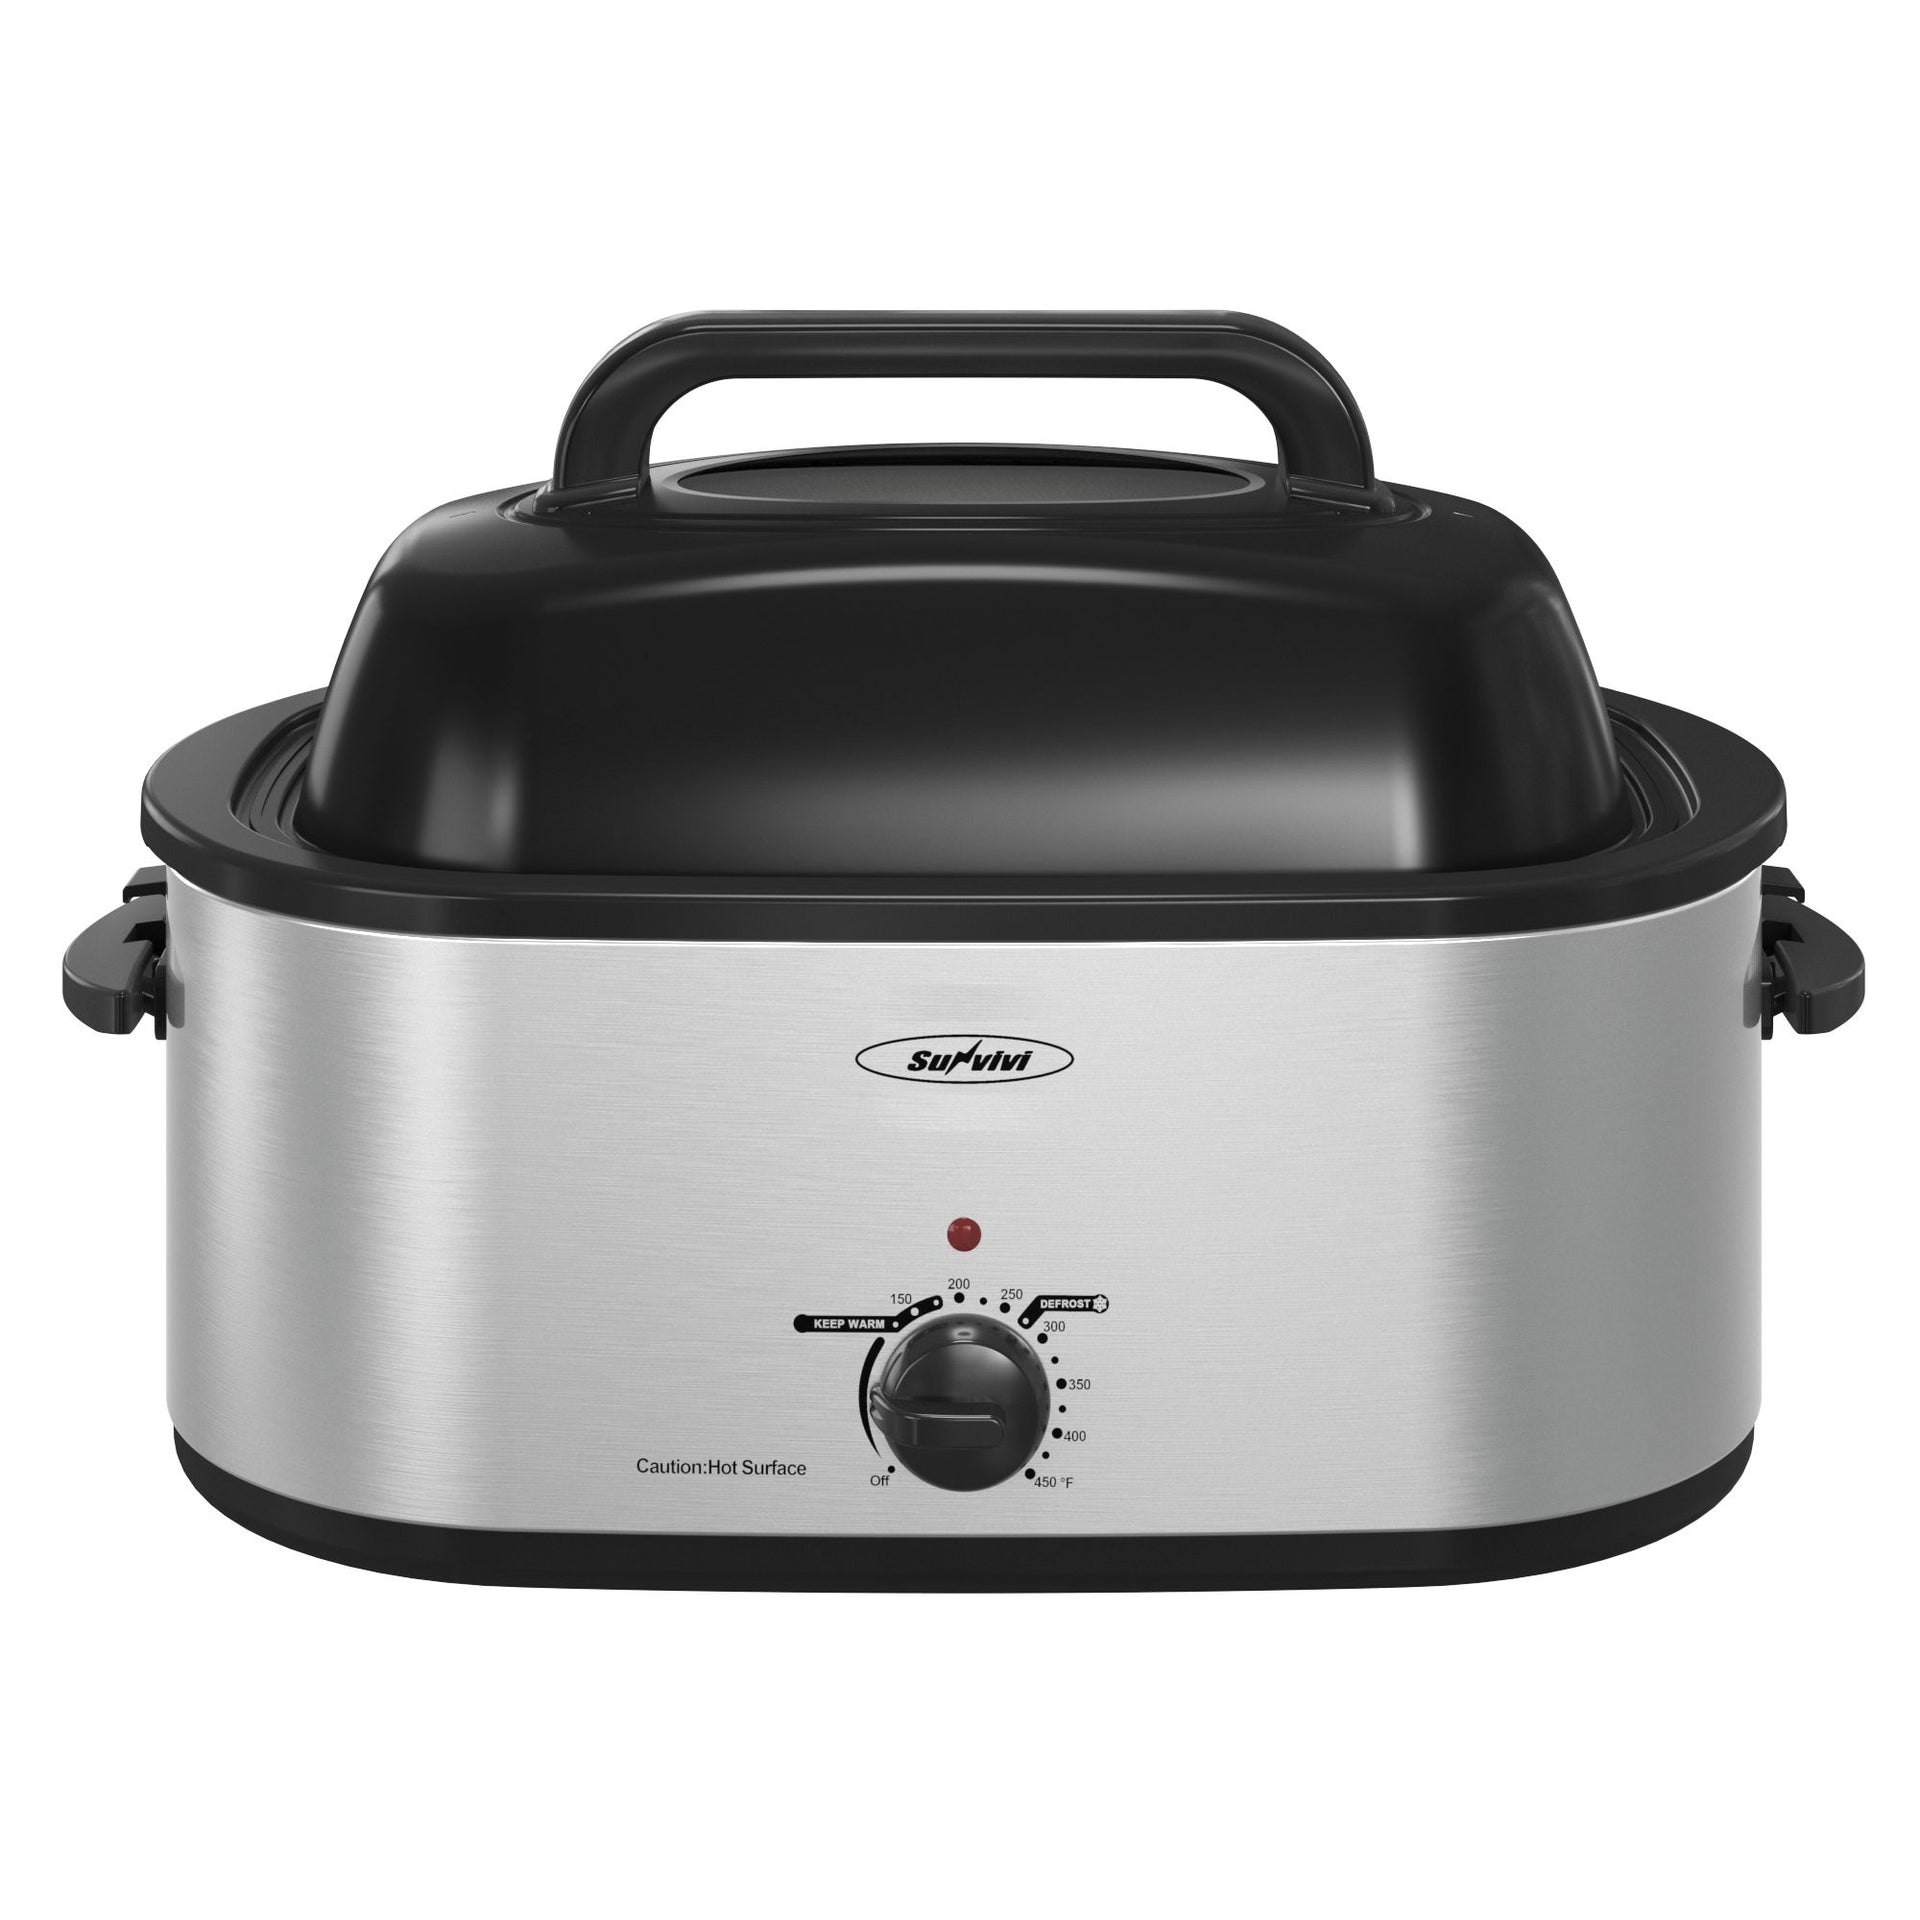 Oster Roaster Oven Self-Basting Lid Stainless Steel Review 